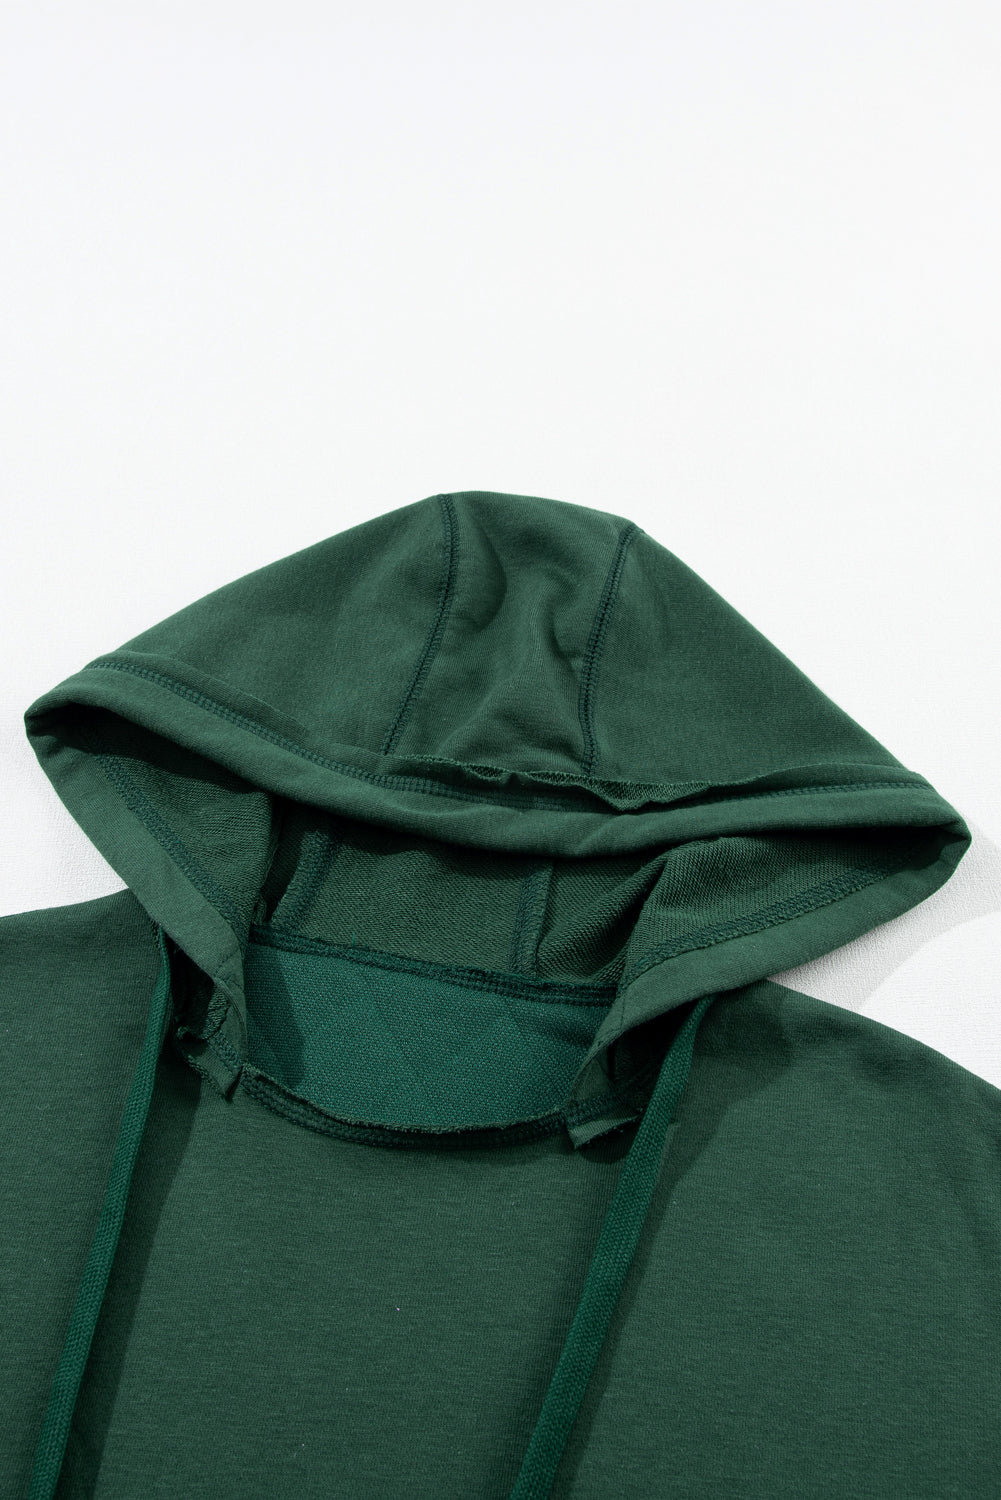 Chestnut Quilted Patchwork Exposed Seam Hoodie